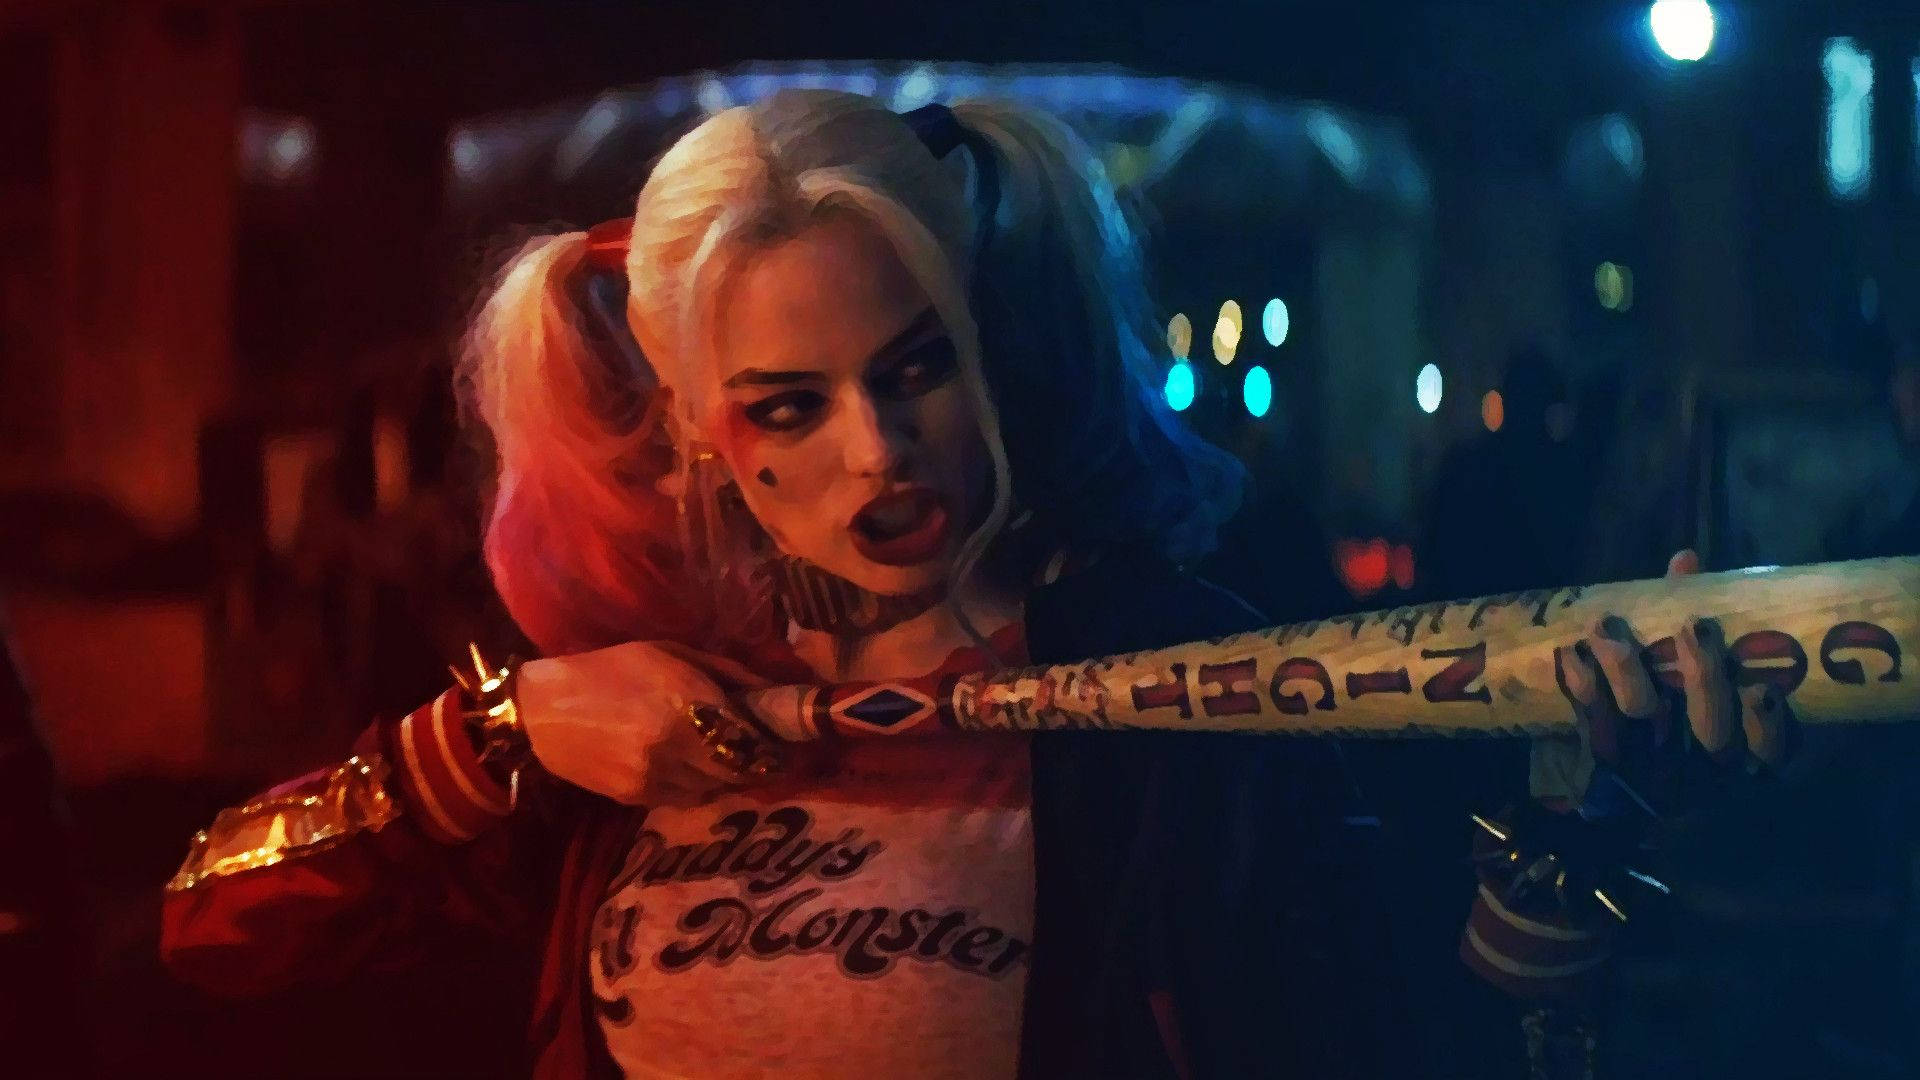 Harley Quinn strides into action in Suicide Squad. Wallpaper